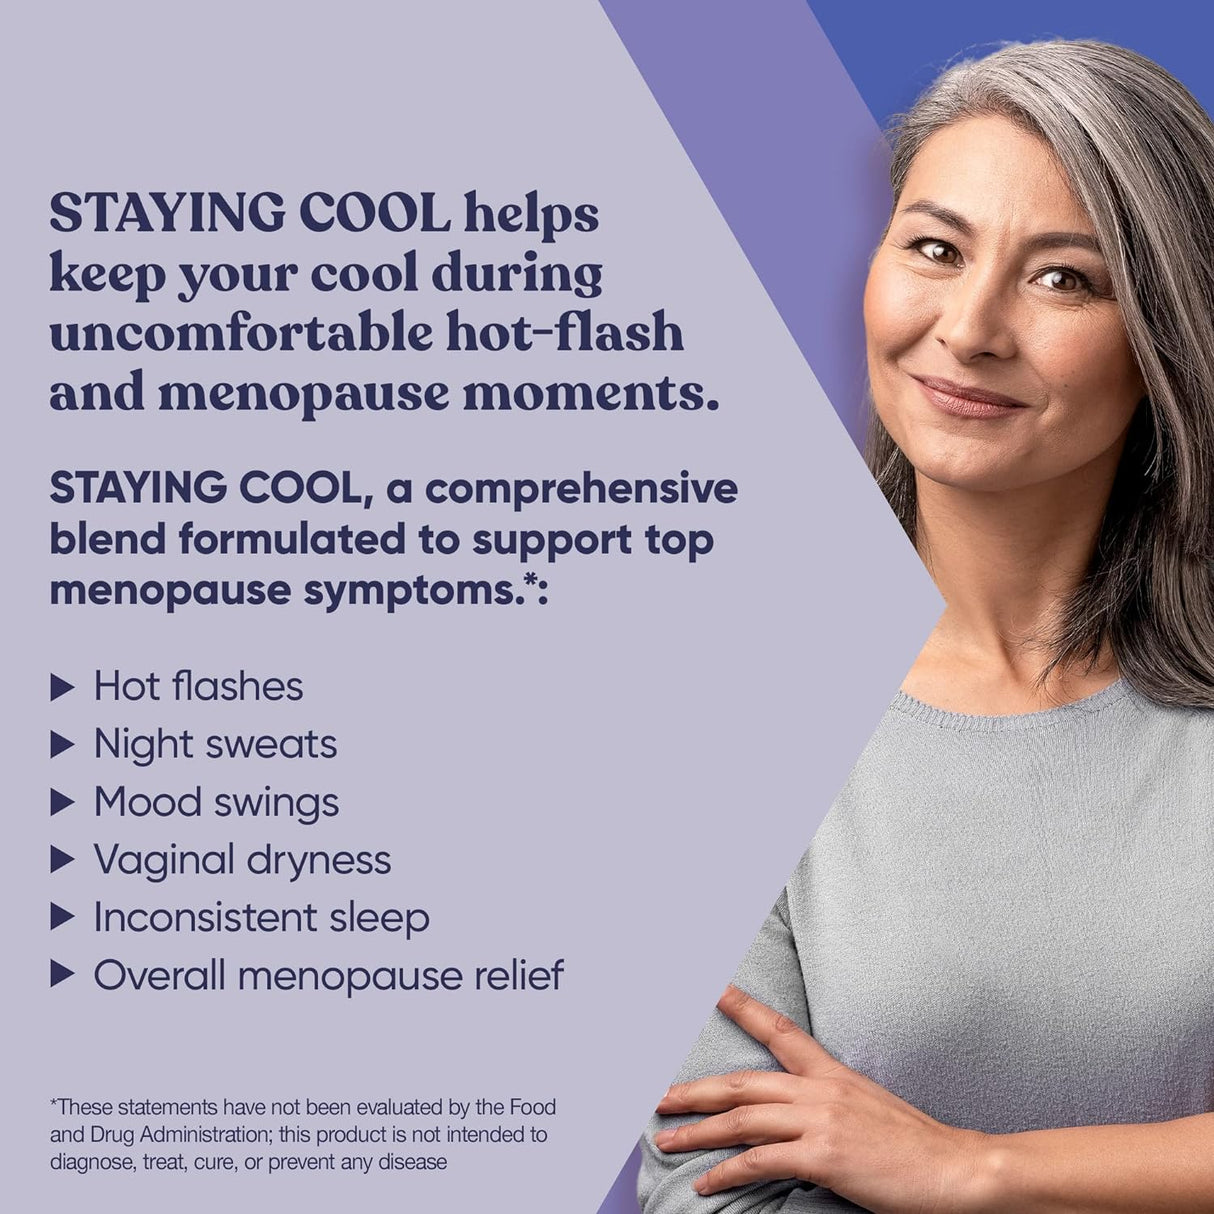 Eu Natural Staying Cool Menopause Supplements for Women 60 Capsulas Blandas